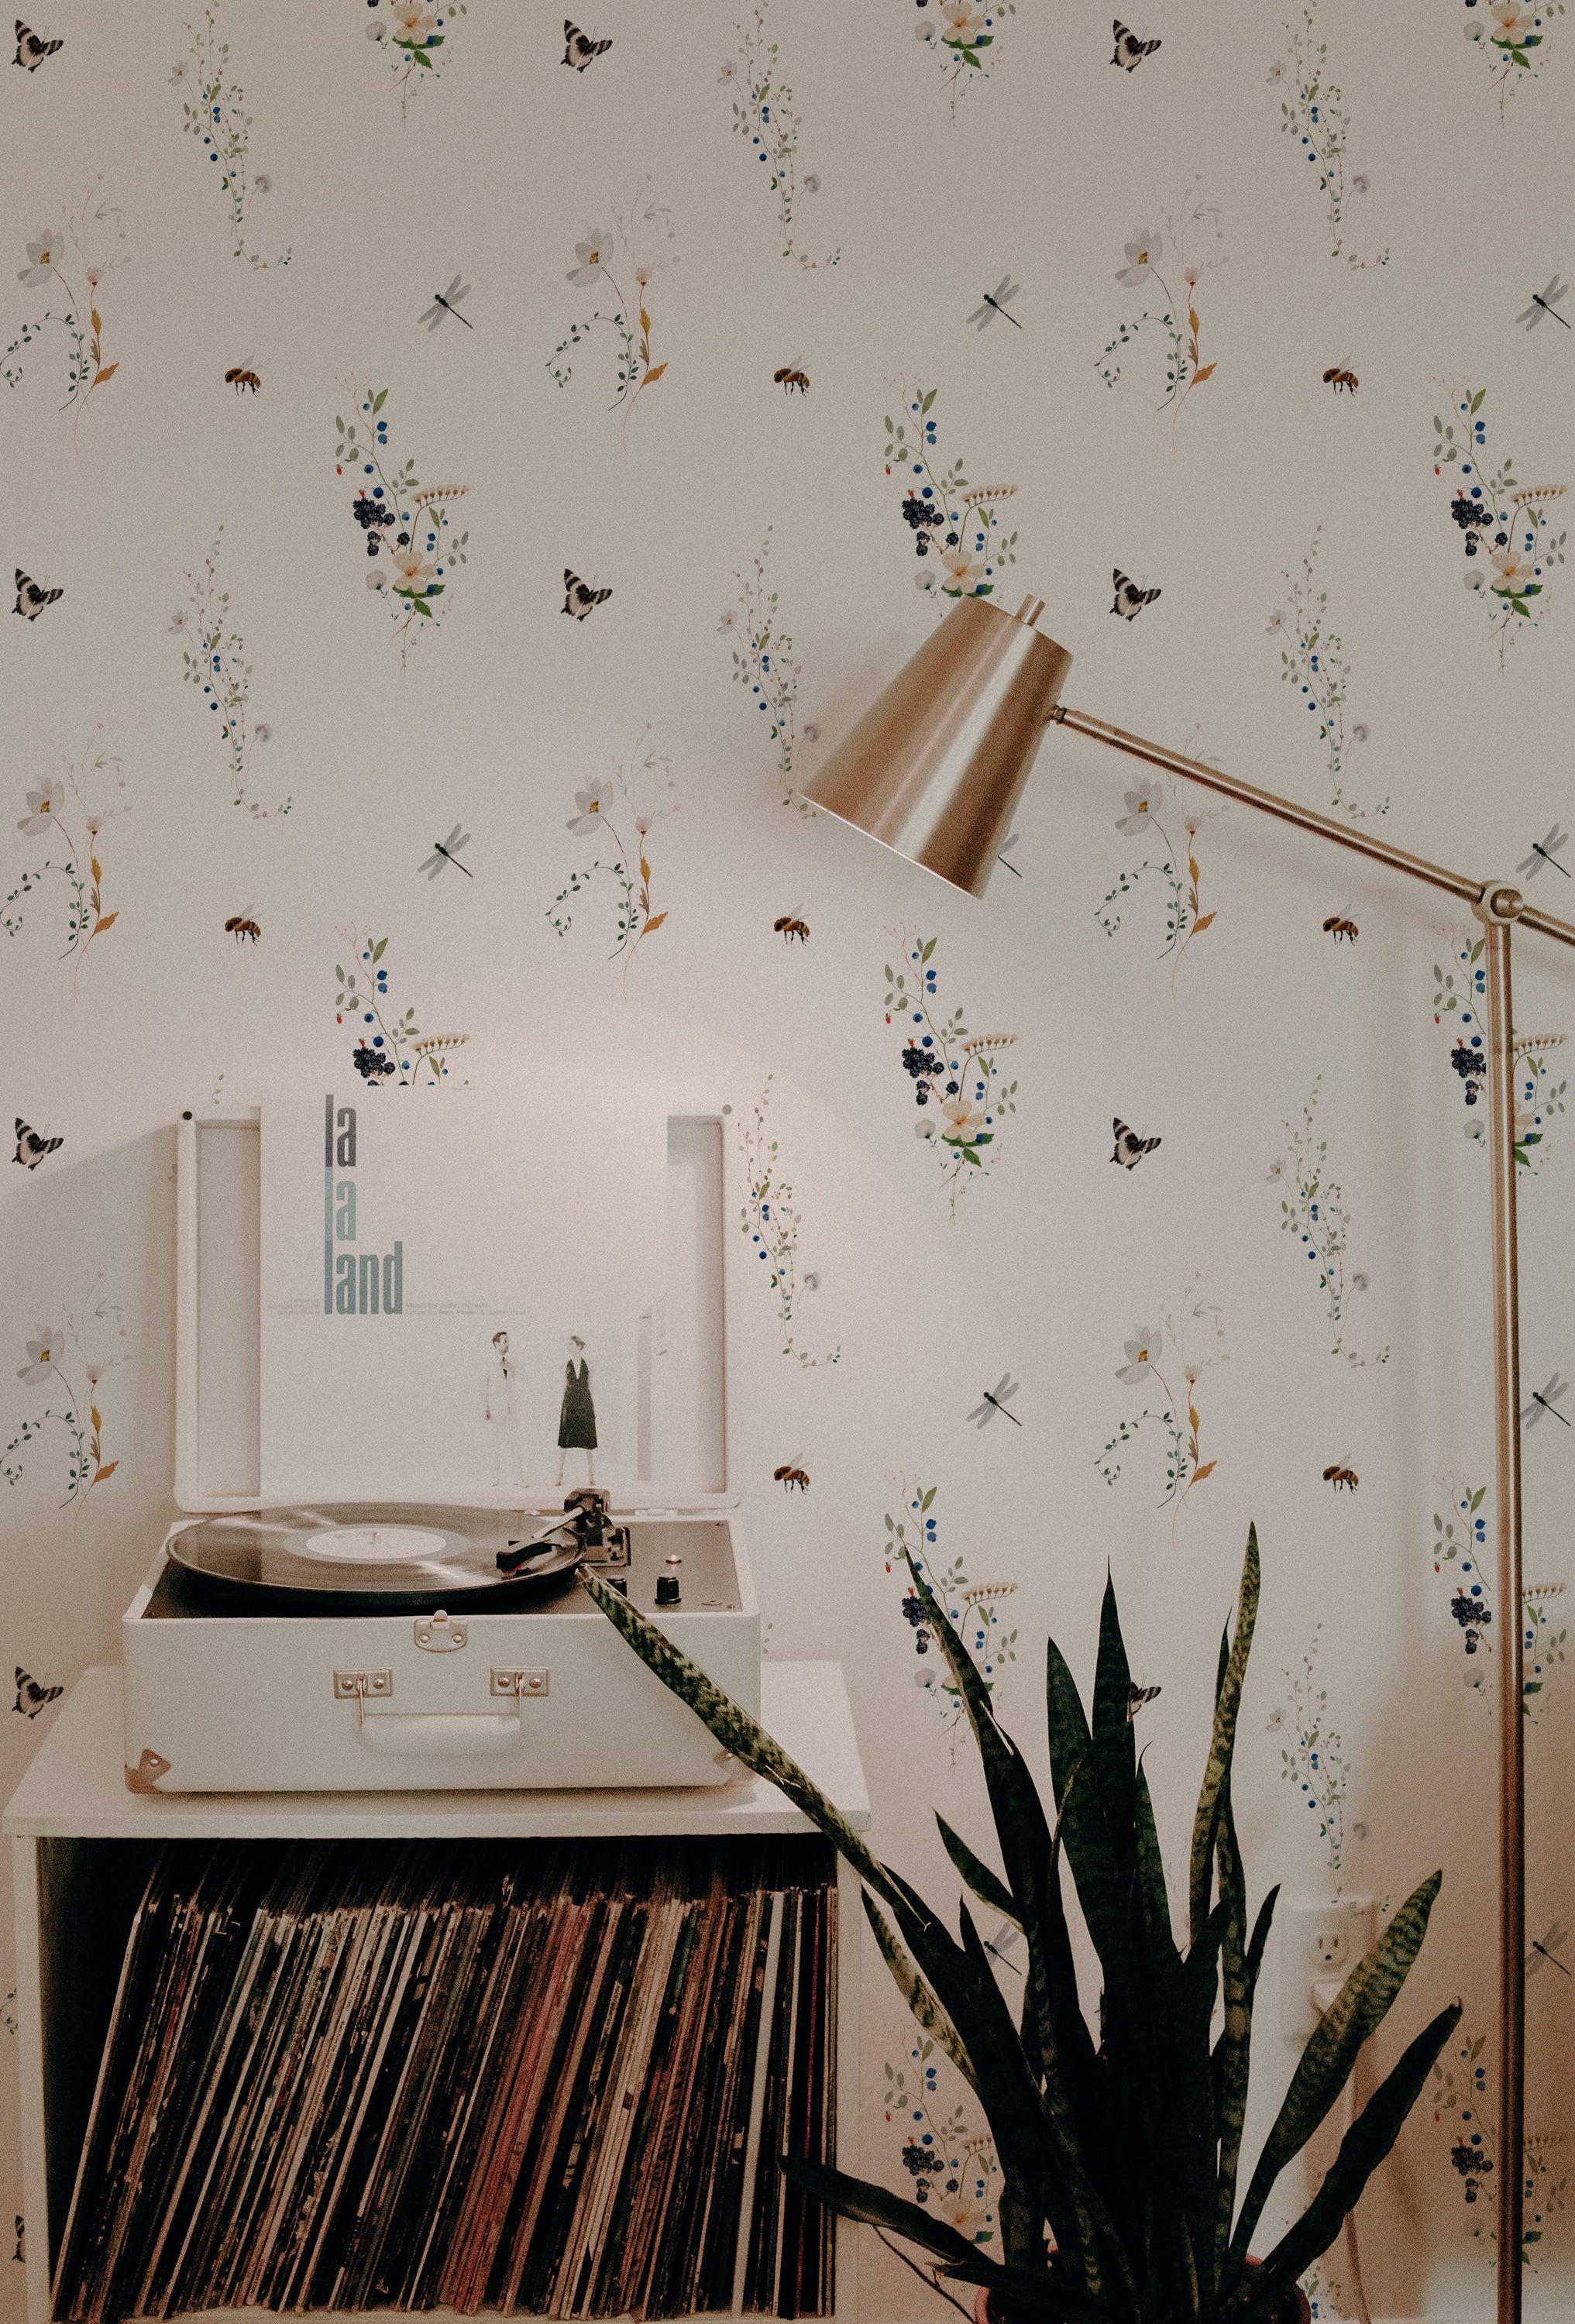 A cozy corner with a playful and botanical themed wallpaper showing a variety of insects and small flowers. This setting includes a record player on a white stand, next to a large green houseplant, enhancing the room's vintage and natural aesthetic.